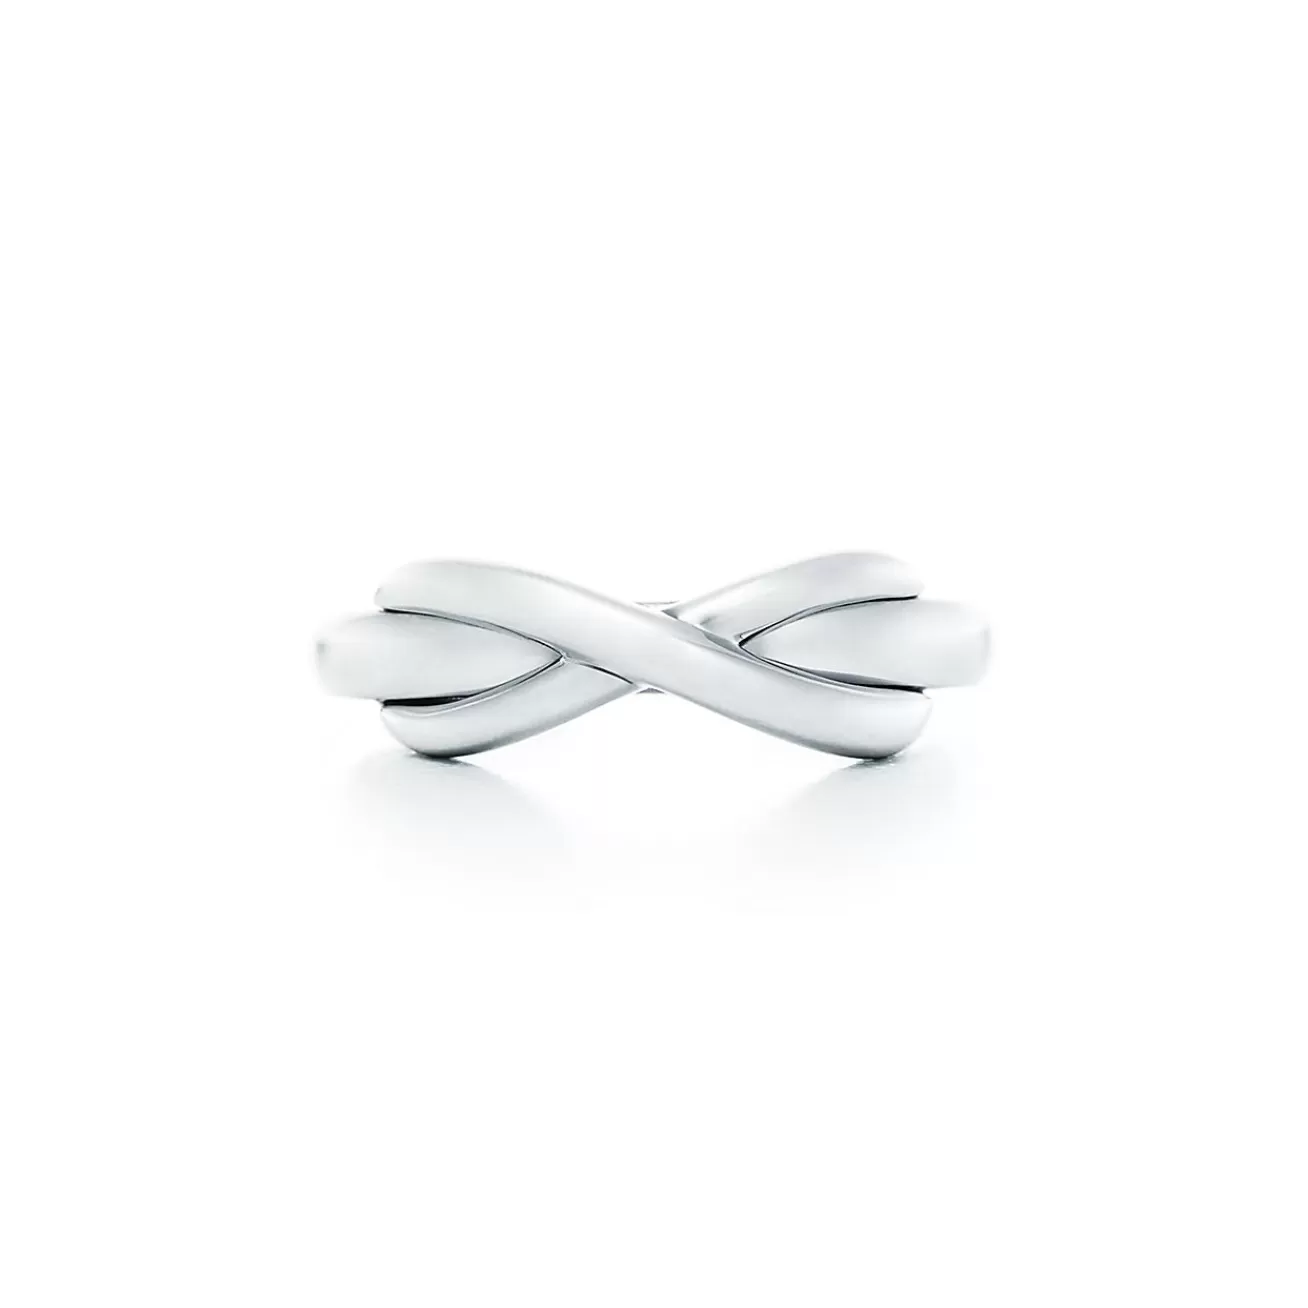 Tiffany & Co. Tiffany Infinity ring in sterling silver. | ^ Rings | Sterling Silver Jewelry